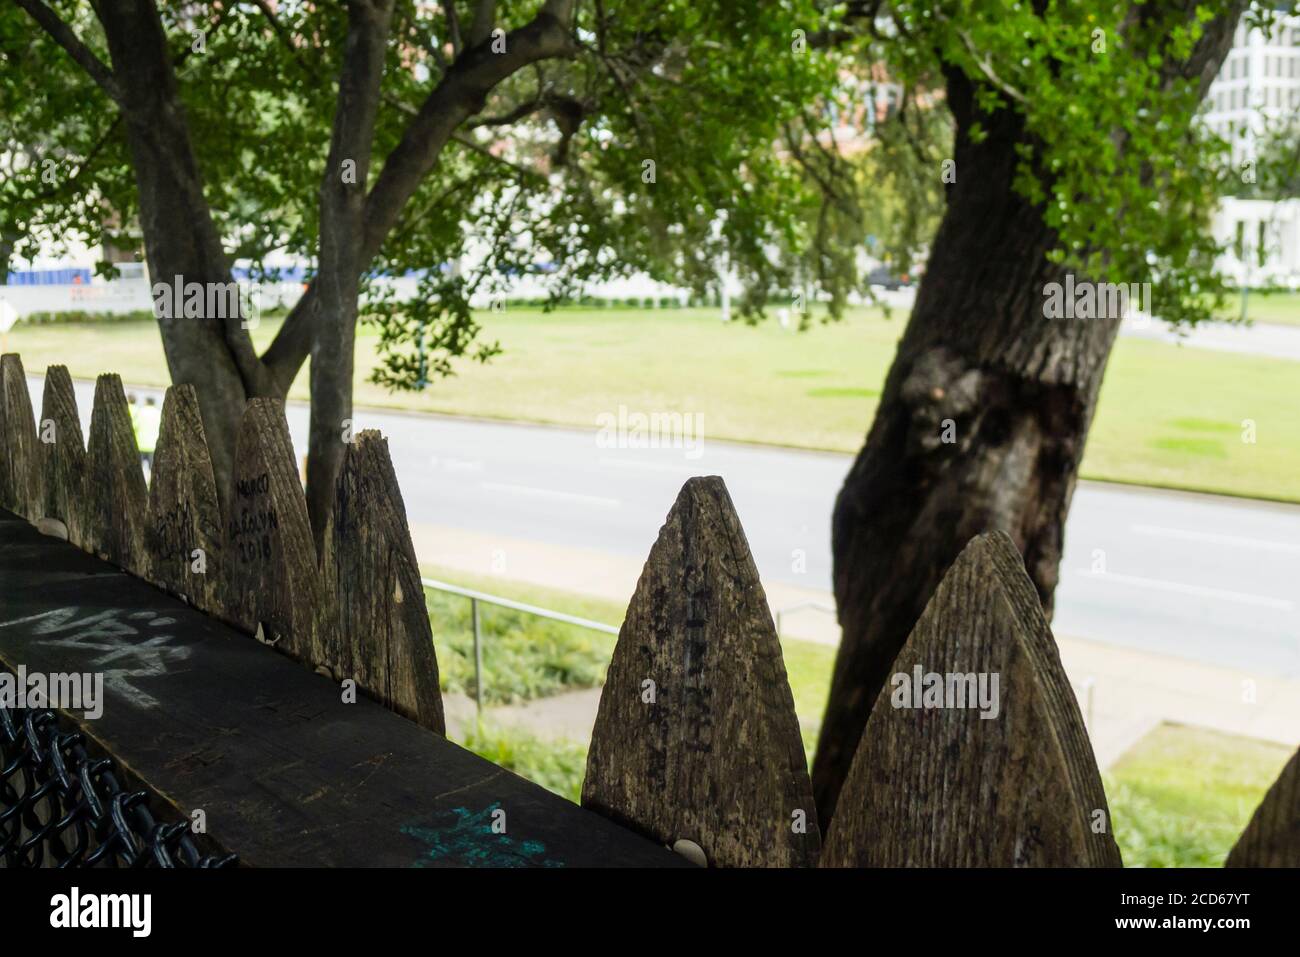 View from Wooden Picket Fence atop the Grassy Knoll Stock Photo